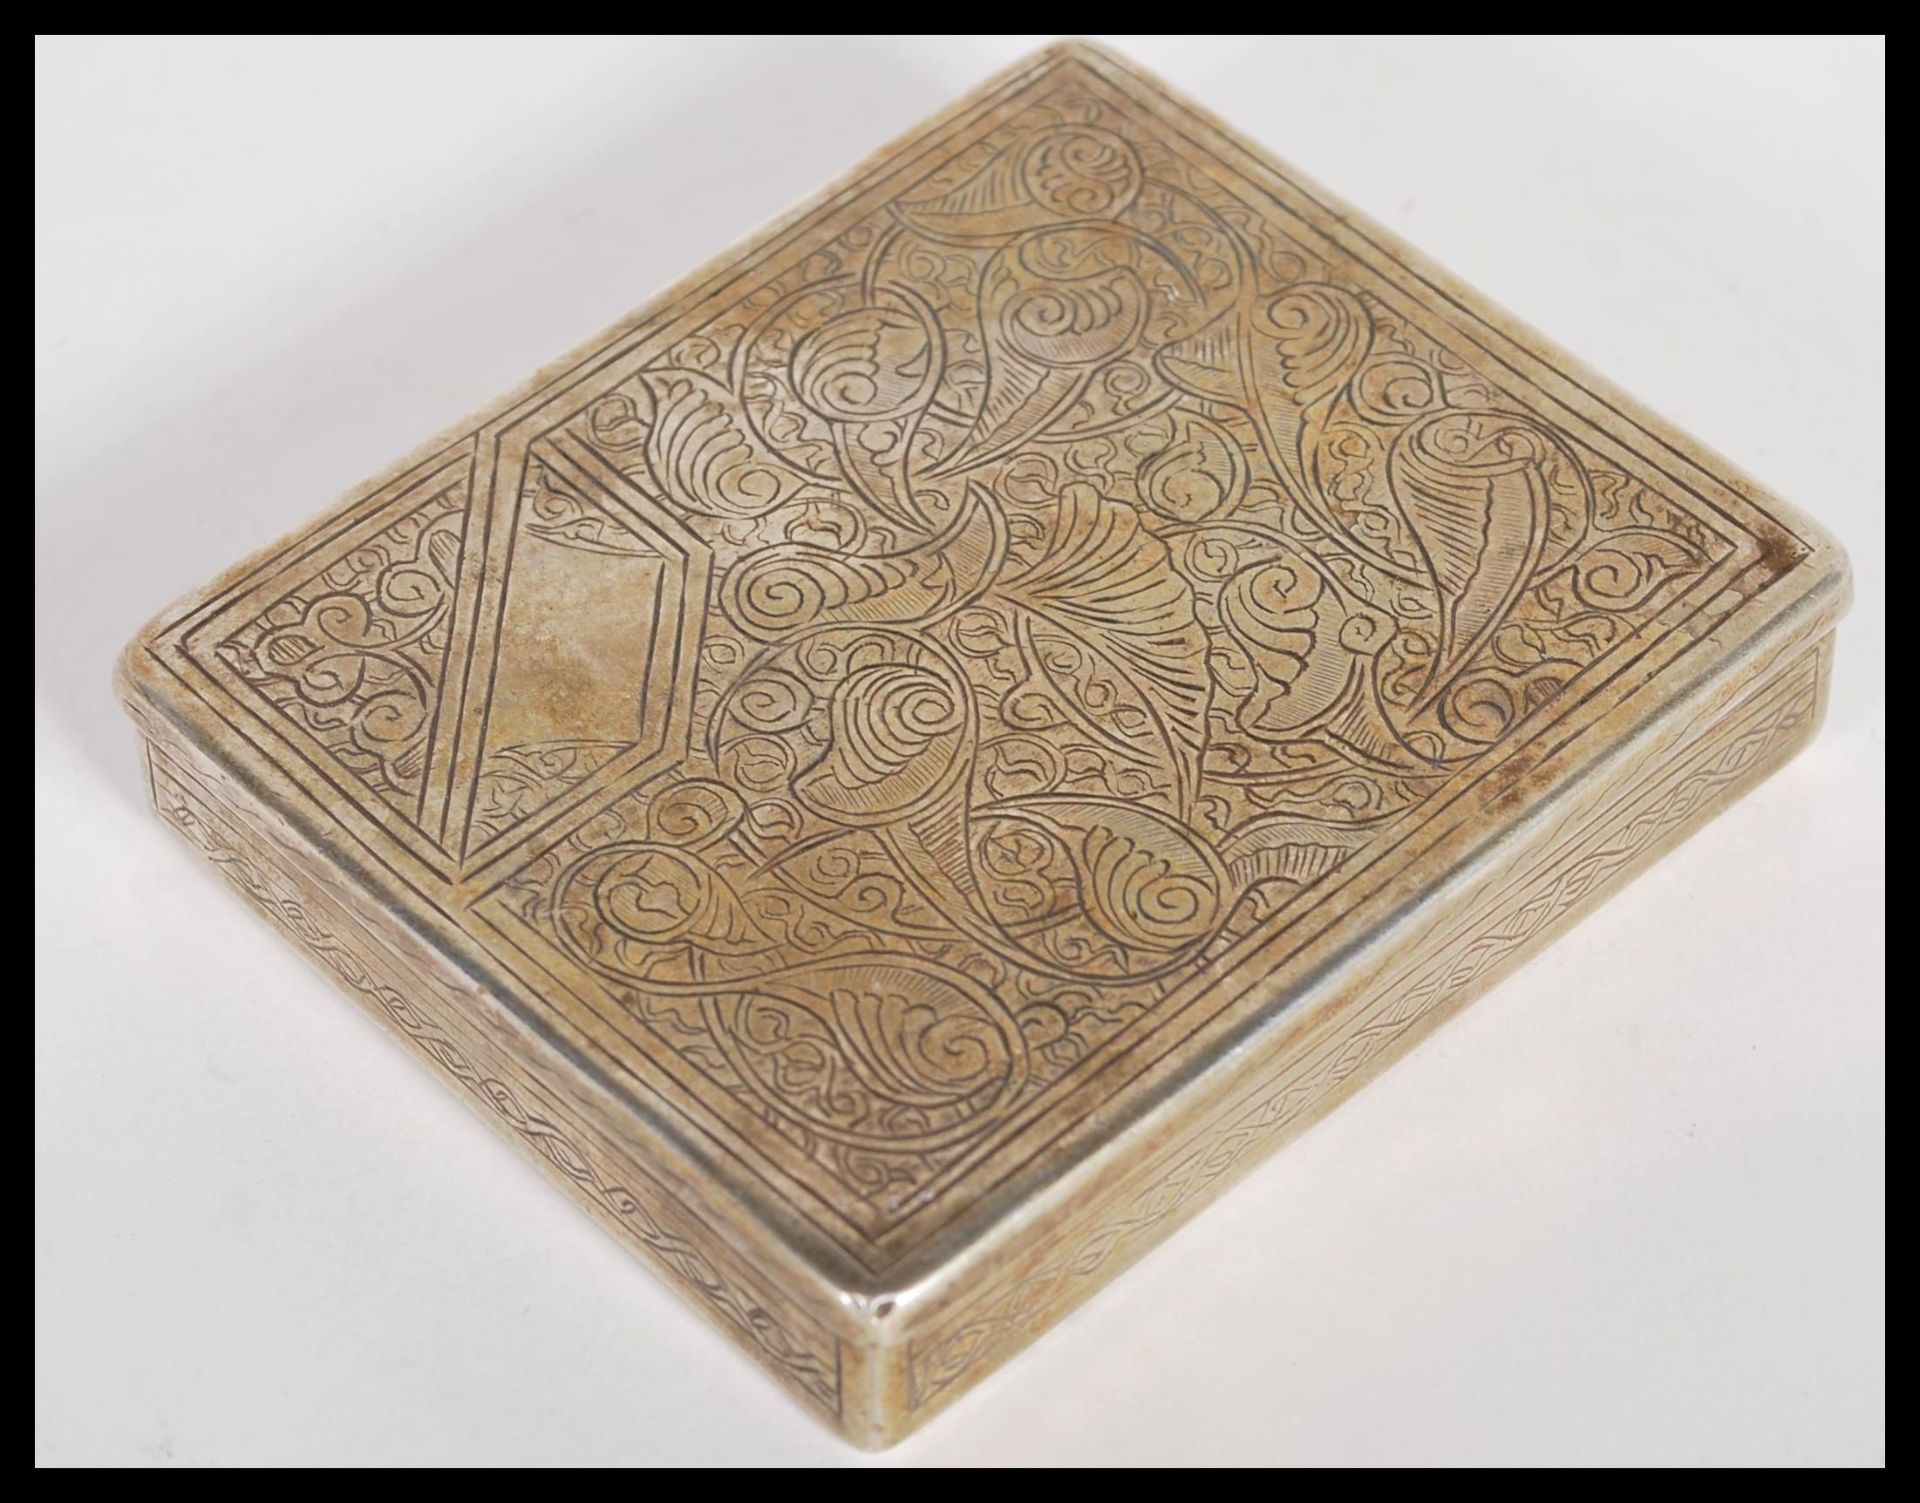 An early 20th Century Islamic silver box having scrolled engraved design. Weighs 115.7 grams. H2cm x